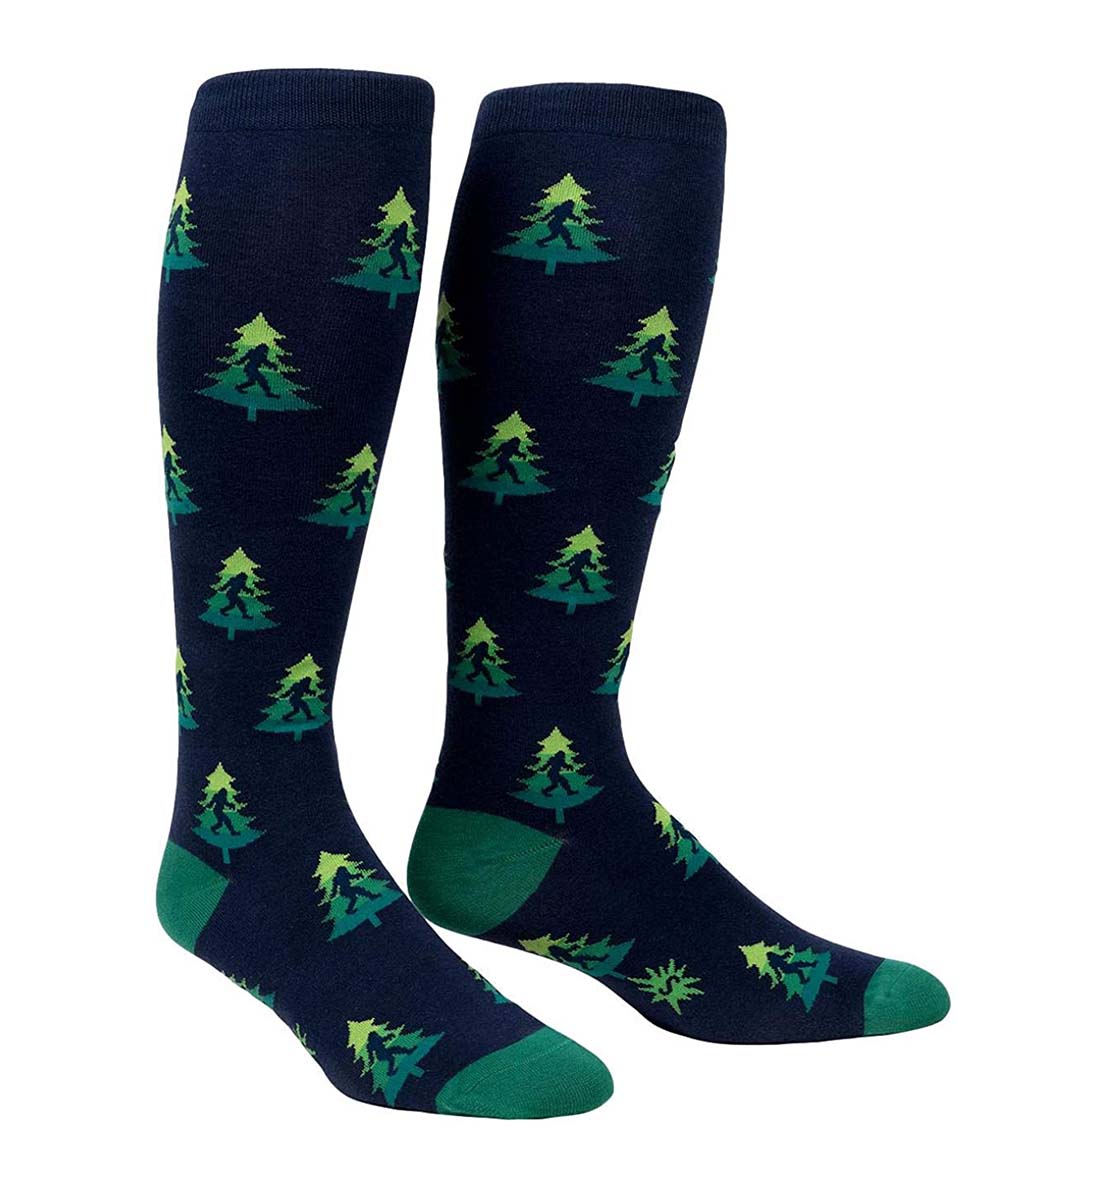 SOCK it to me Unisex Stretch-It Knee High Socks (s0122),Do You Tree What I Tree - Do You Tree What I Tree,One Size